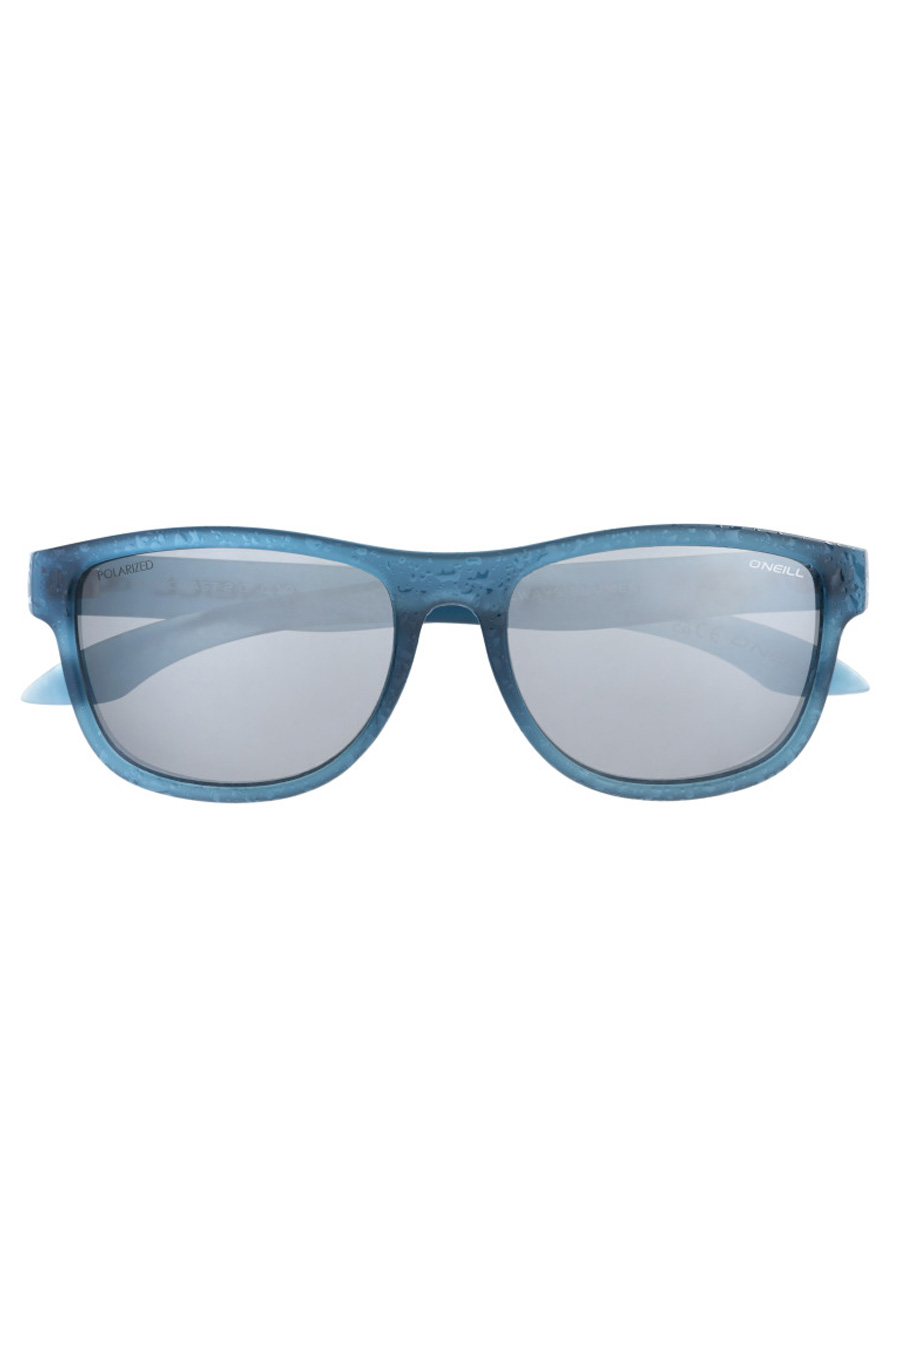 Saulesbrilles ONEILL ONS-COAST20-105P